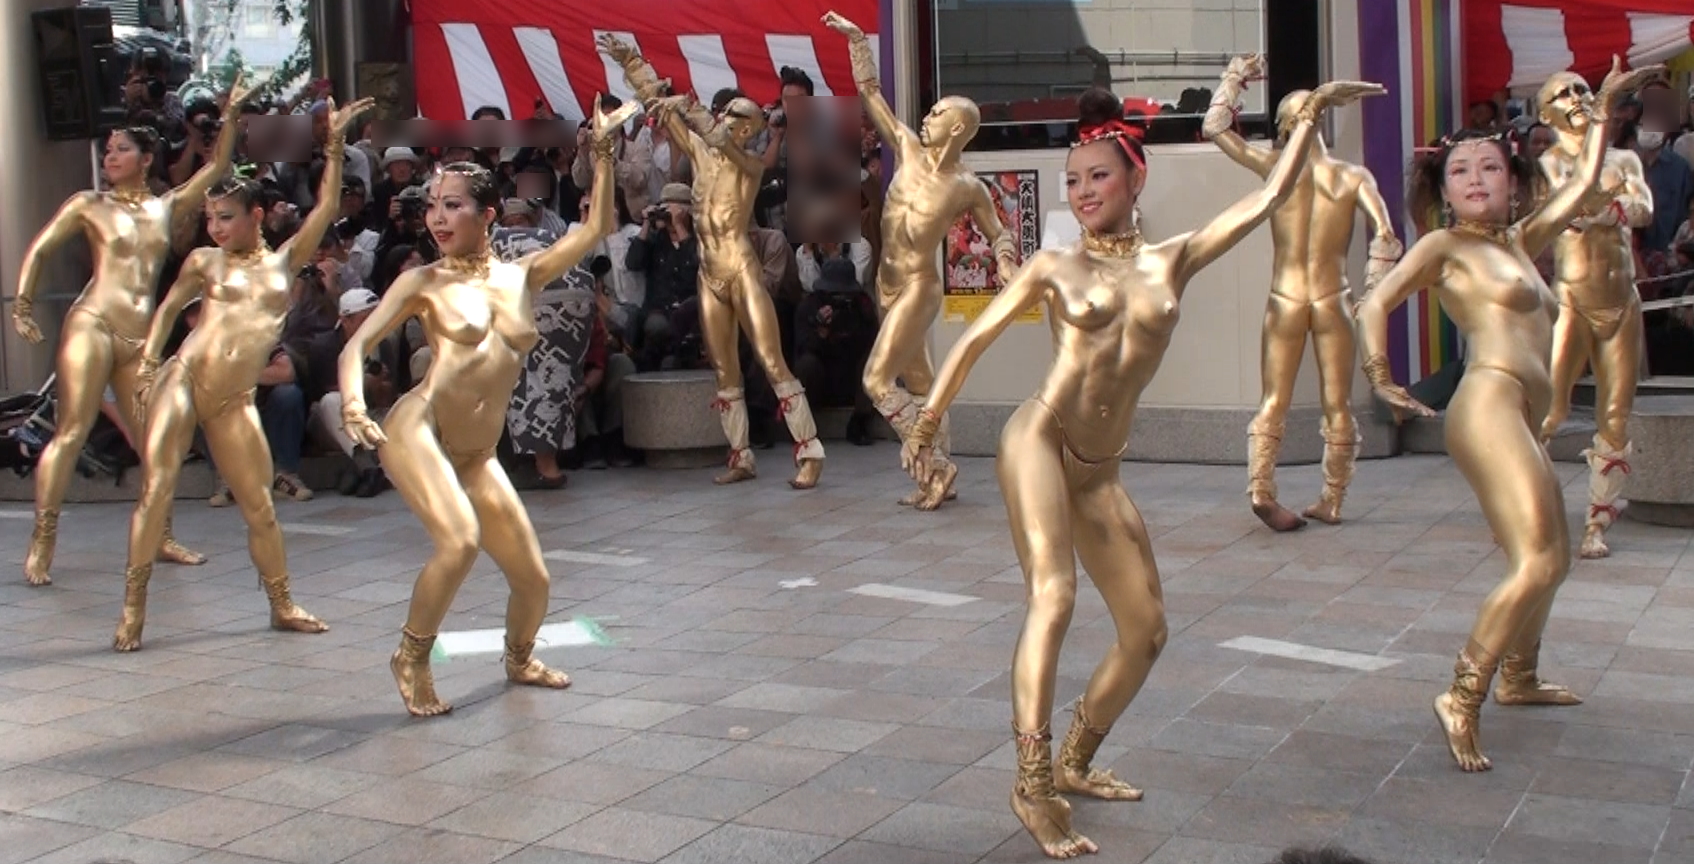 Chinese nude dance